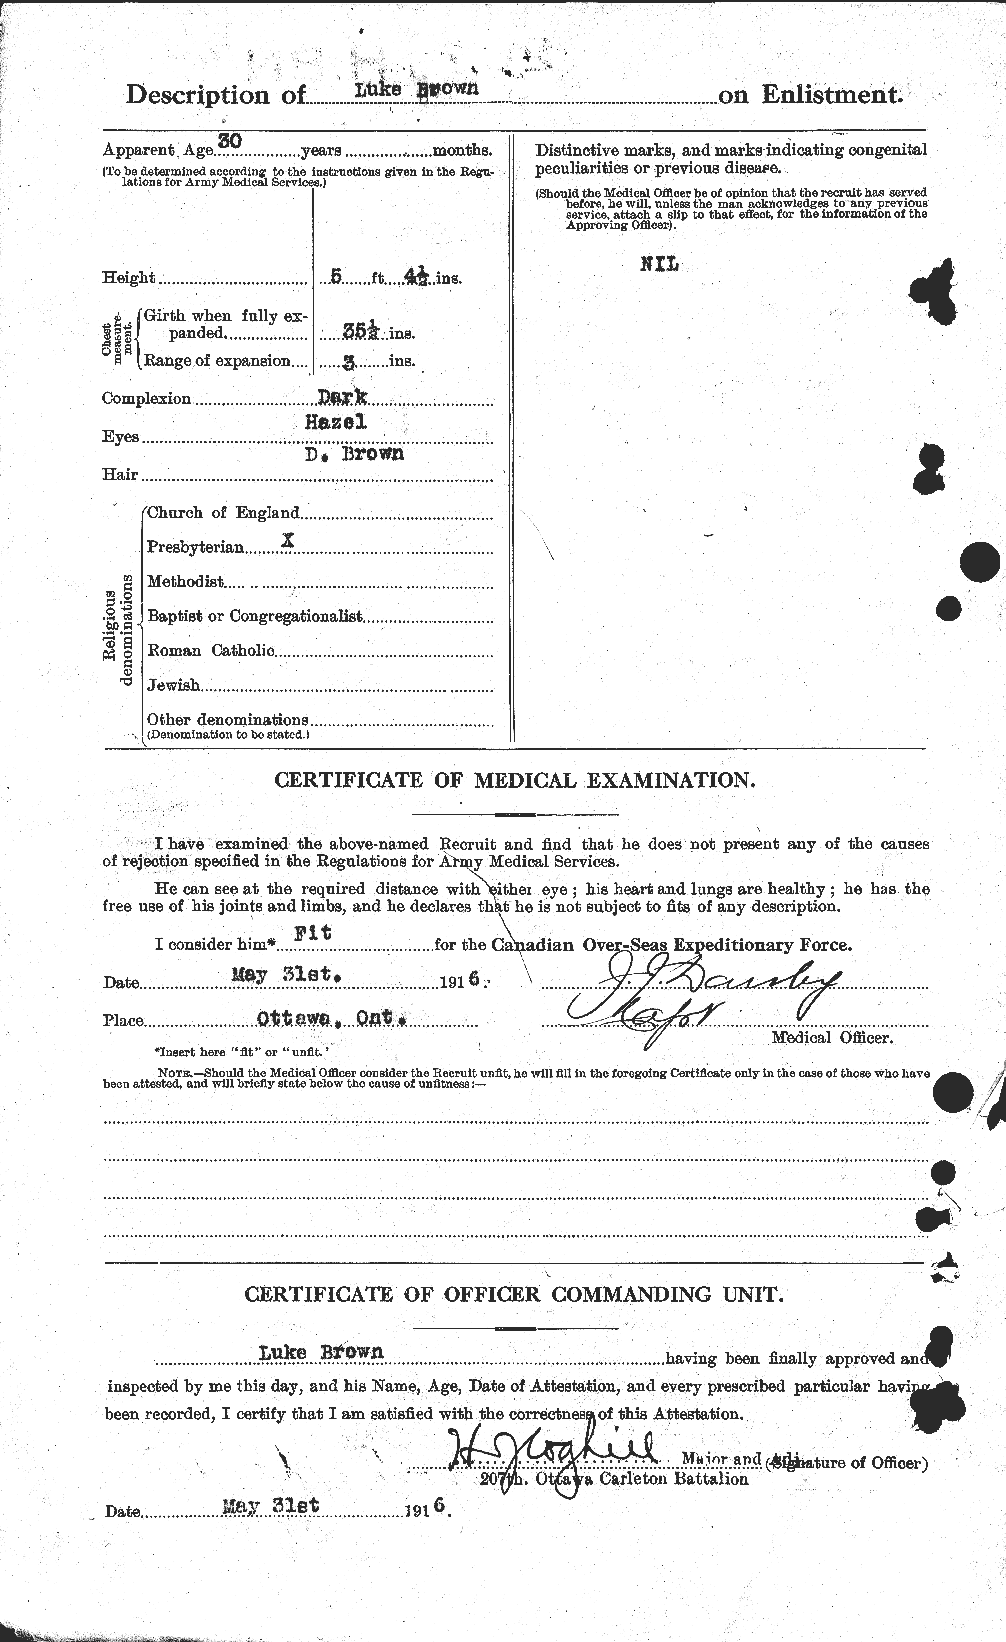 Personnel Records of the First World War - CEF 266342b